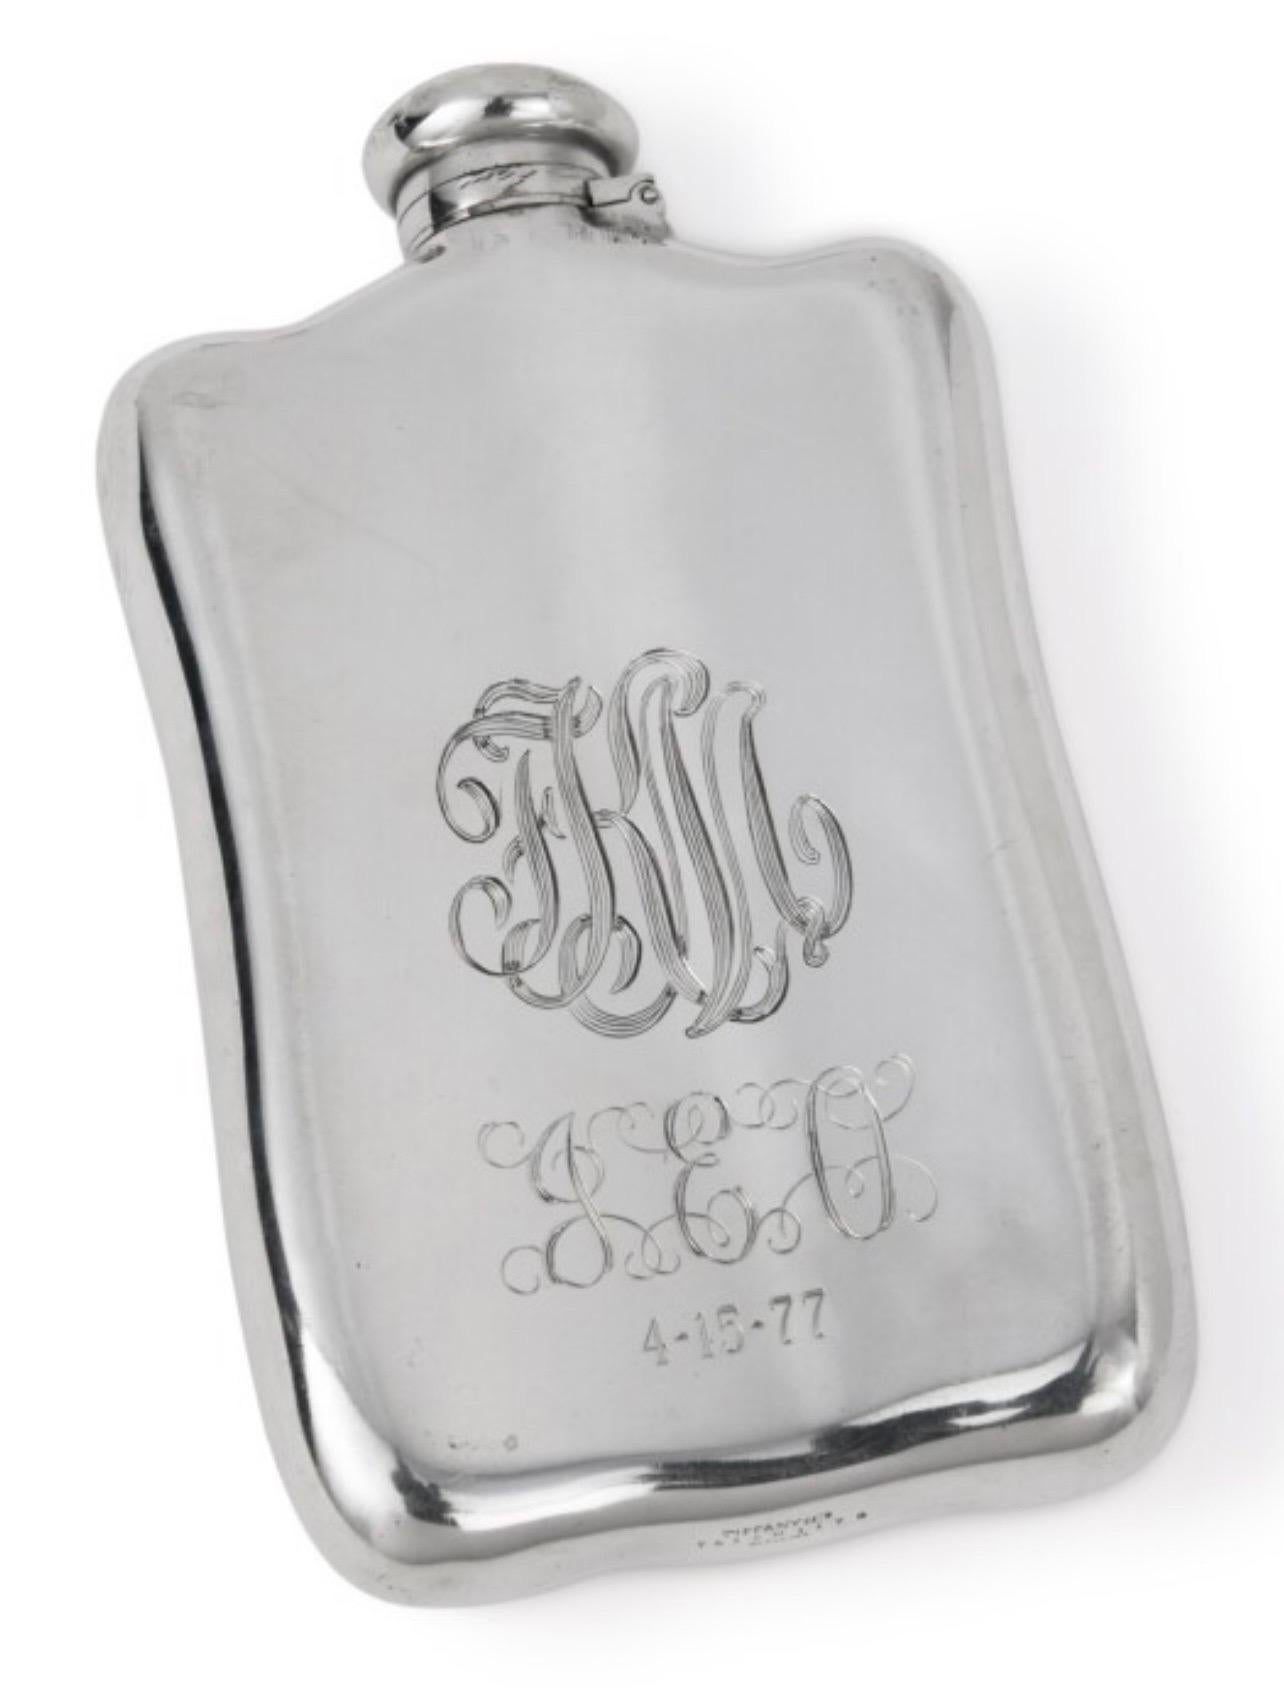 This acid etched and engraved Tiffany sterling silver flask with full marks for 1882 might be the most fully articulated narrative in Tiffany flask history — and that’s saying a lot, given the talent of chasers and engravers for the firm in this